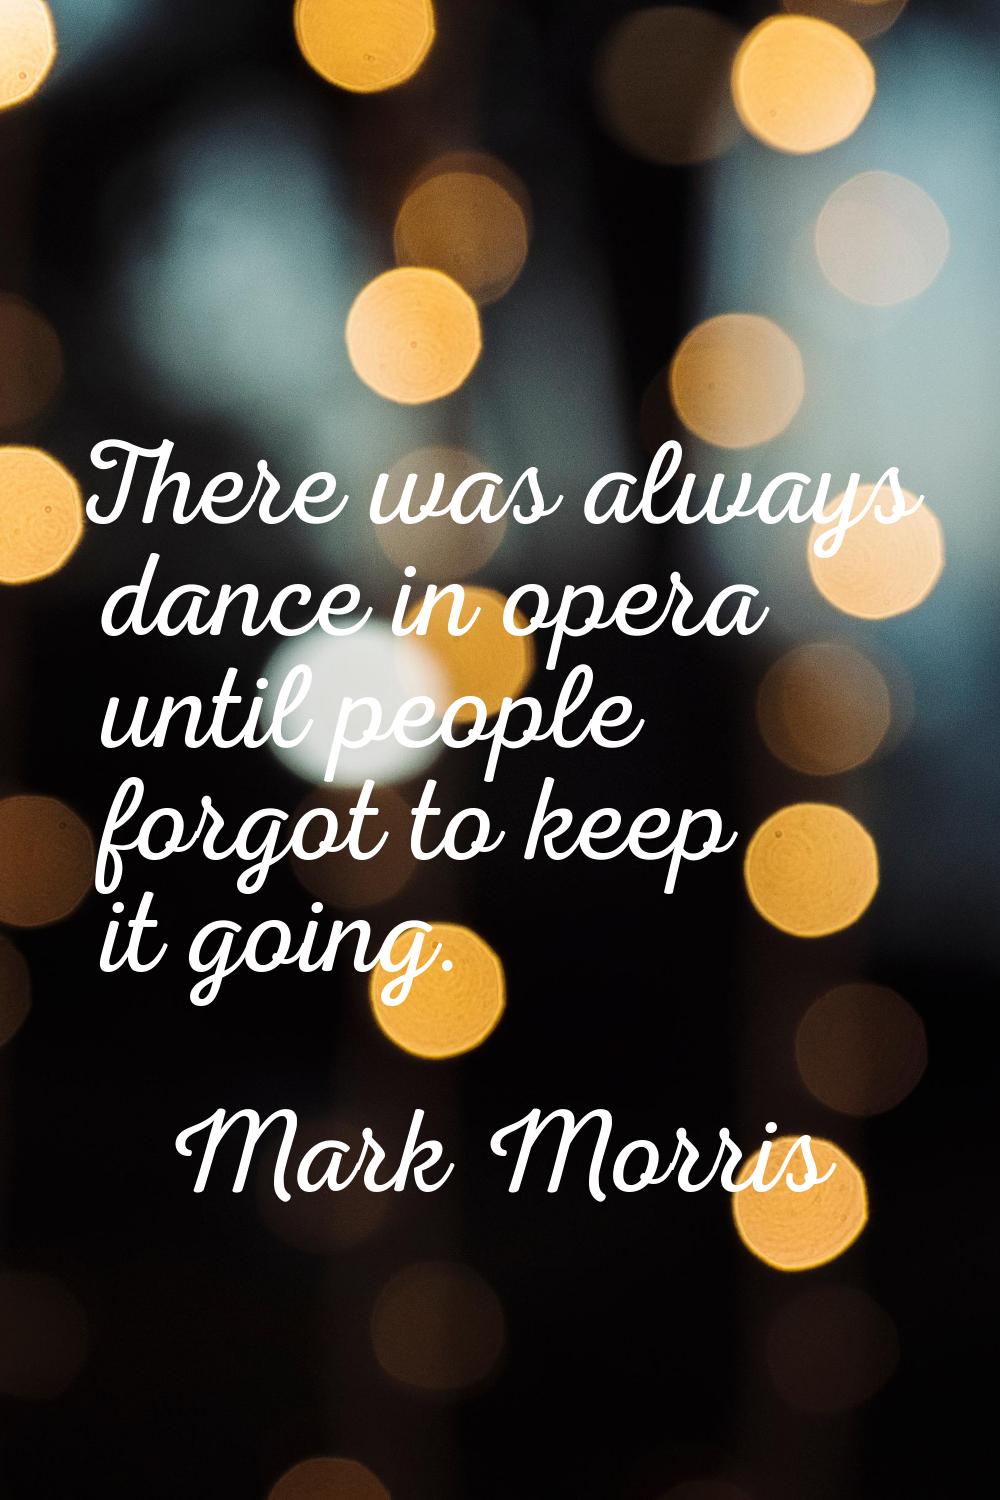 There was always dance in opera until people forgot to keep it going.